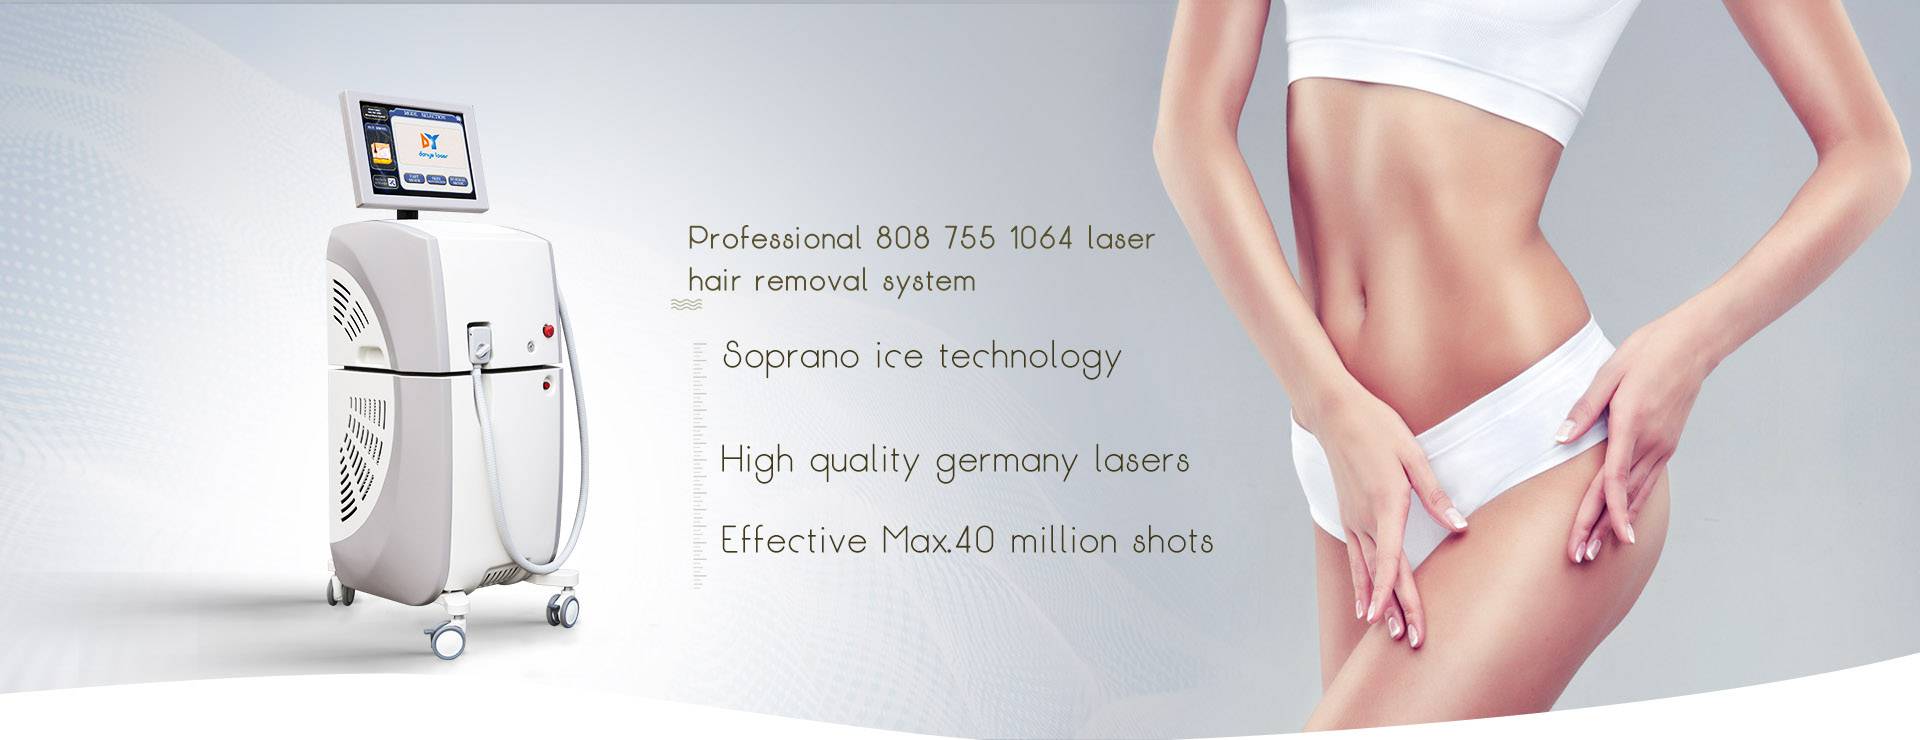 DANYE Mixed Wave Diode Laser 808nm 755nm and 1064 nm 3 Wavelengths Hair Removal Machine